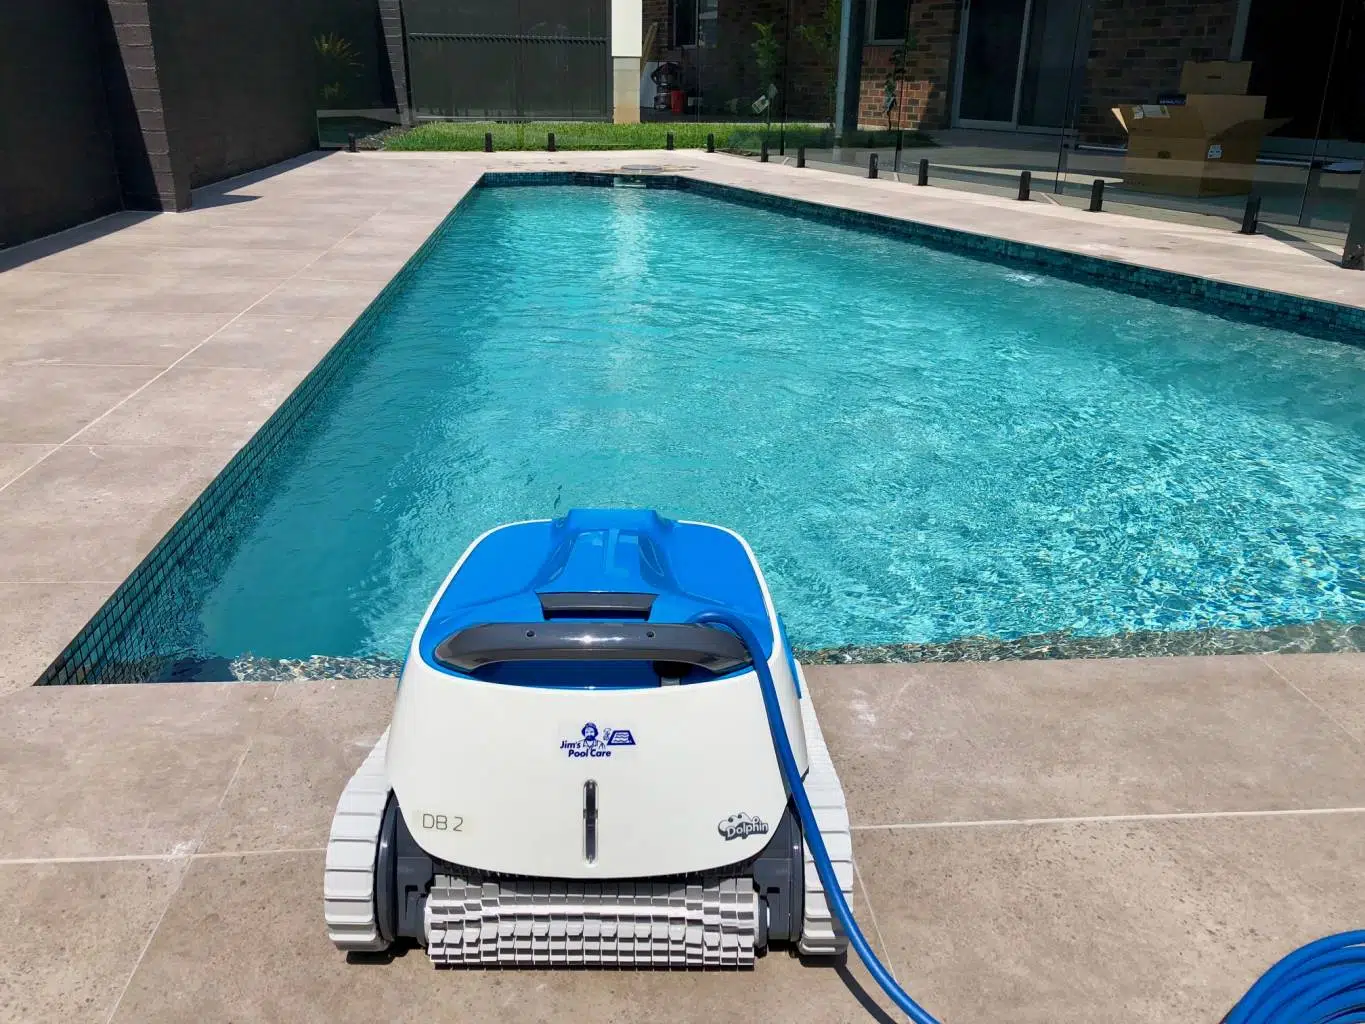 Jim's Robotic Pool Cleaner by Maytronics